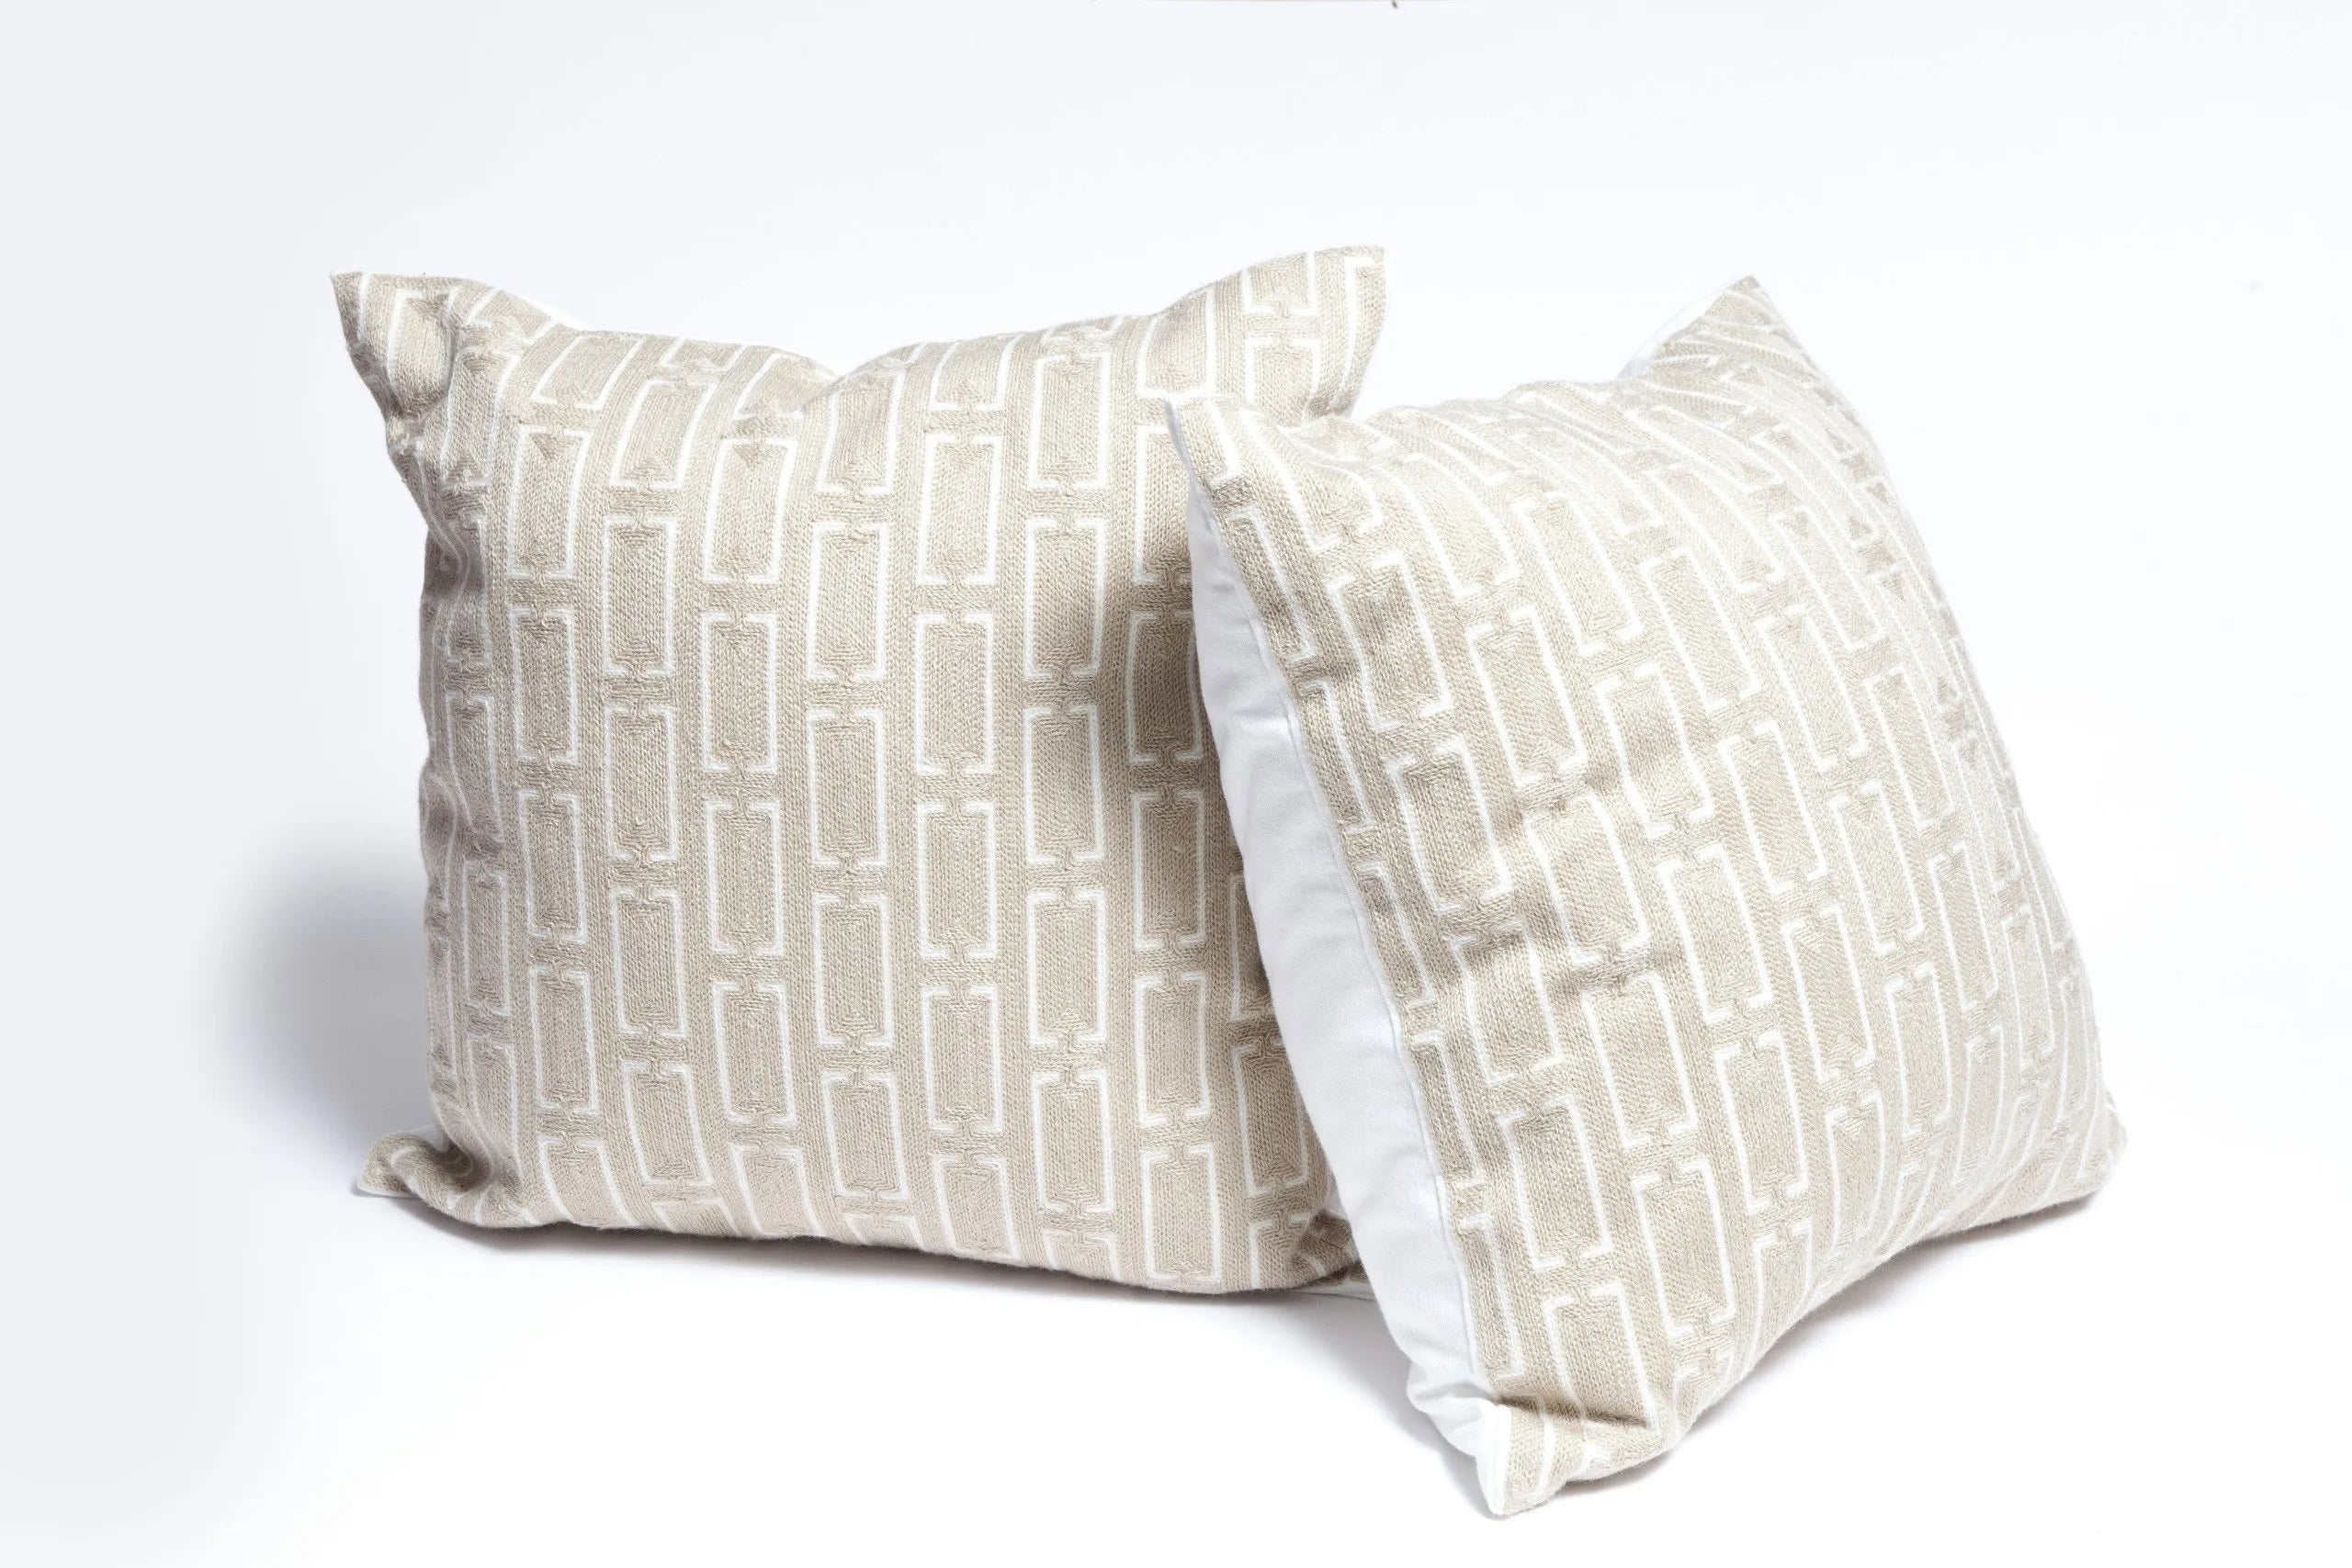 A simple cushion can make a best-selling POD product. Source: Shutterstock.